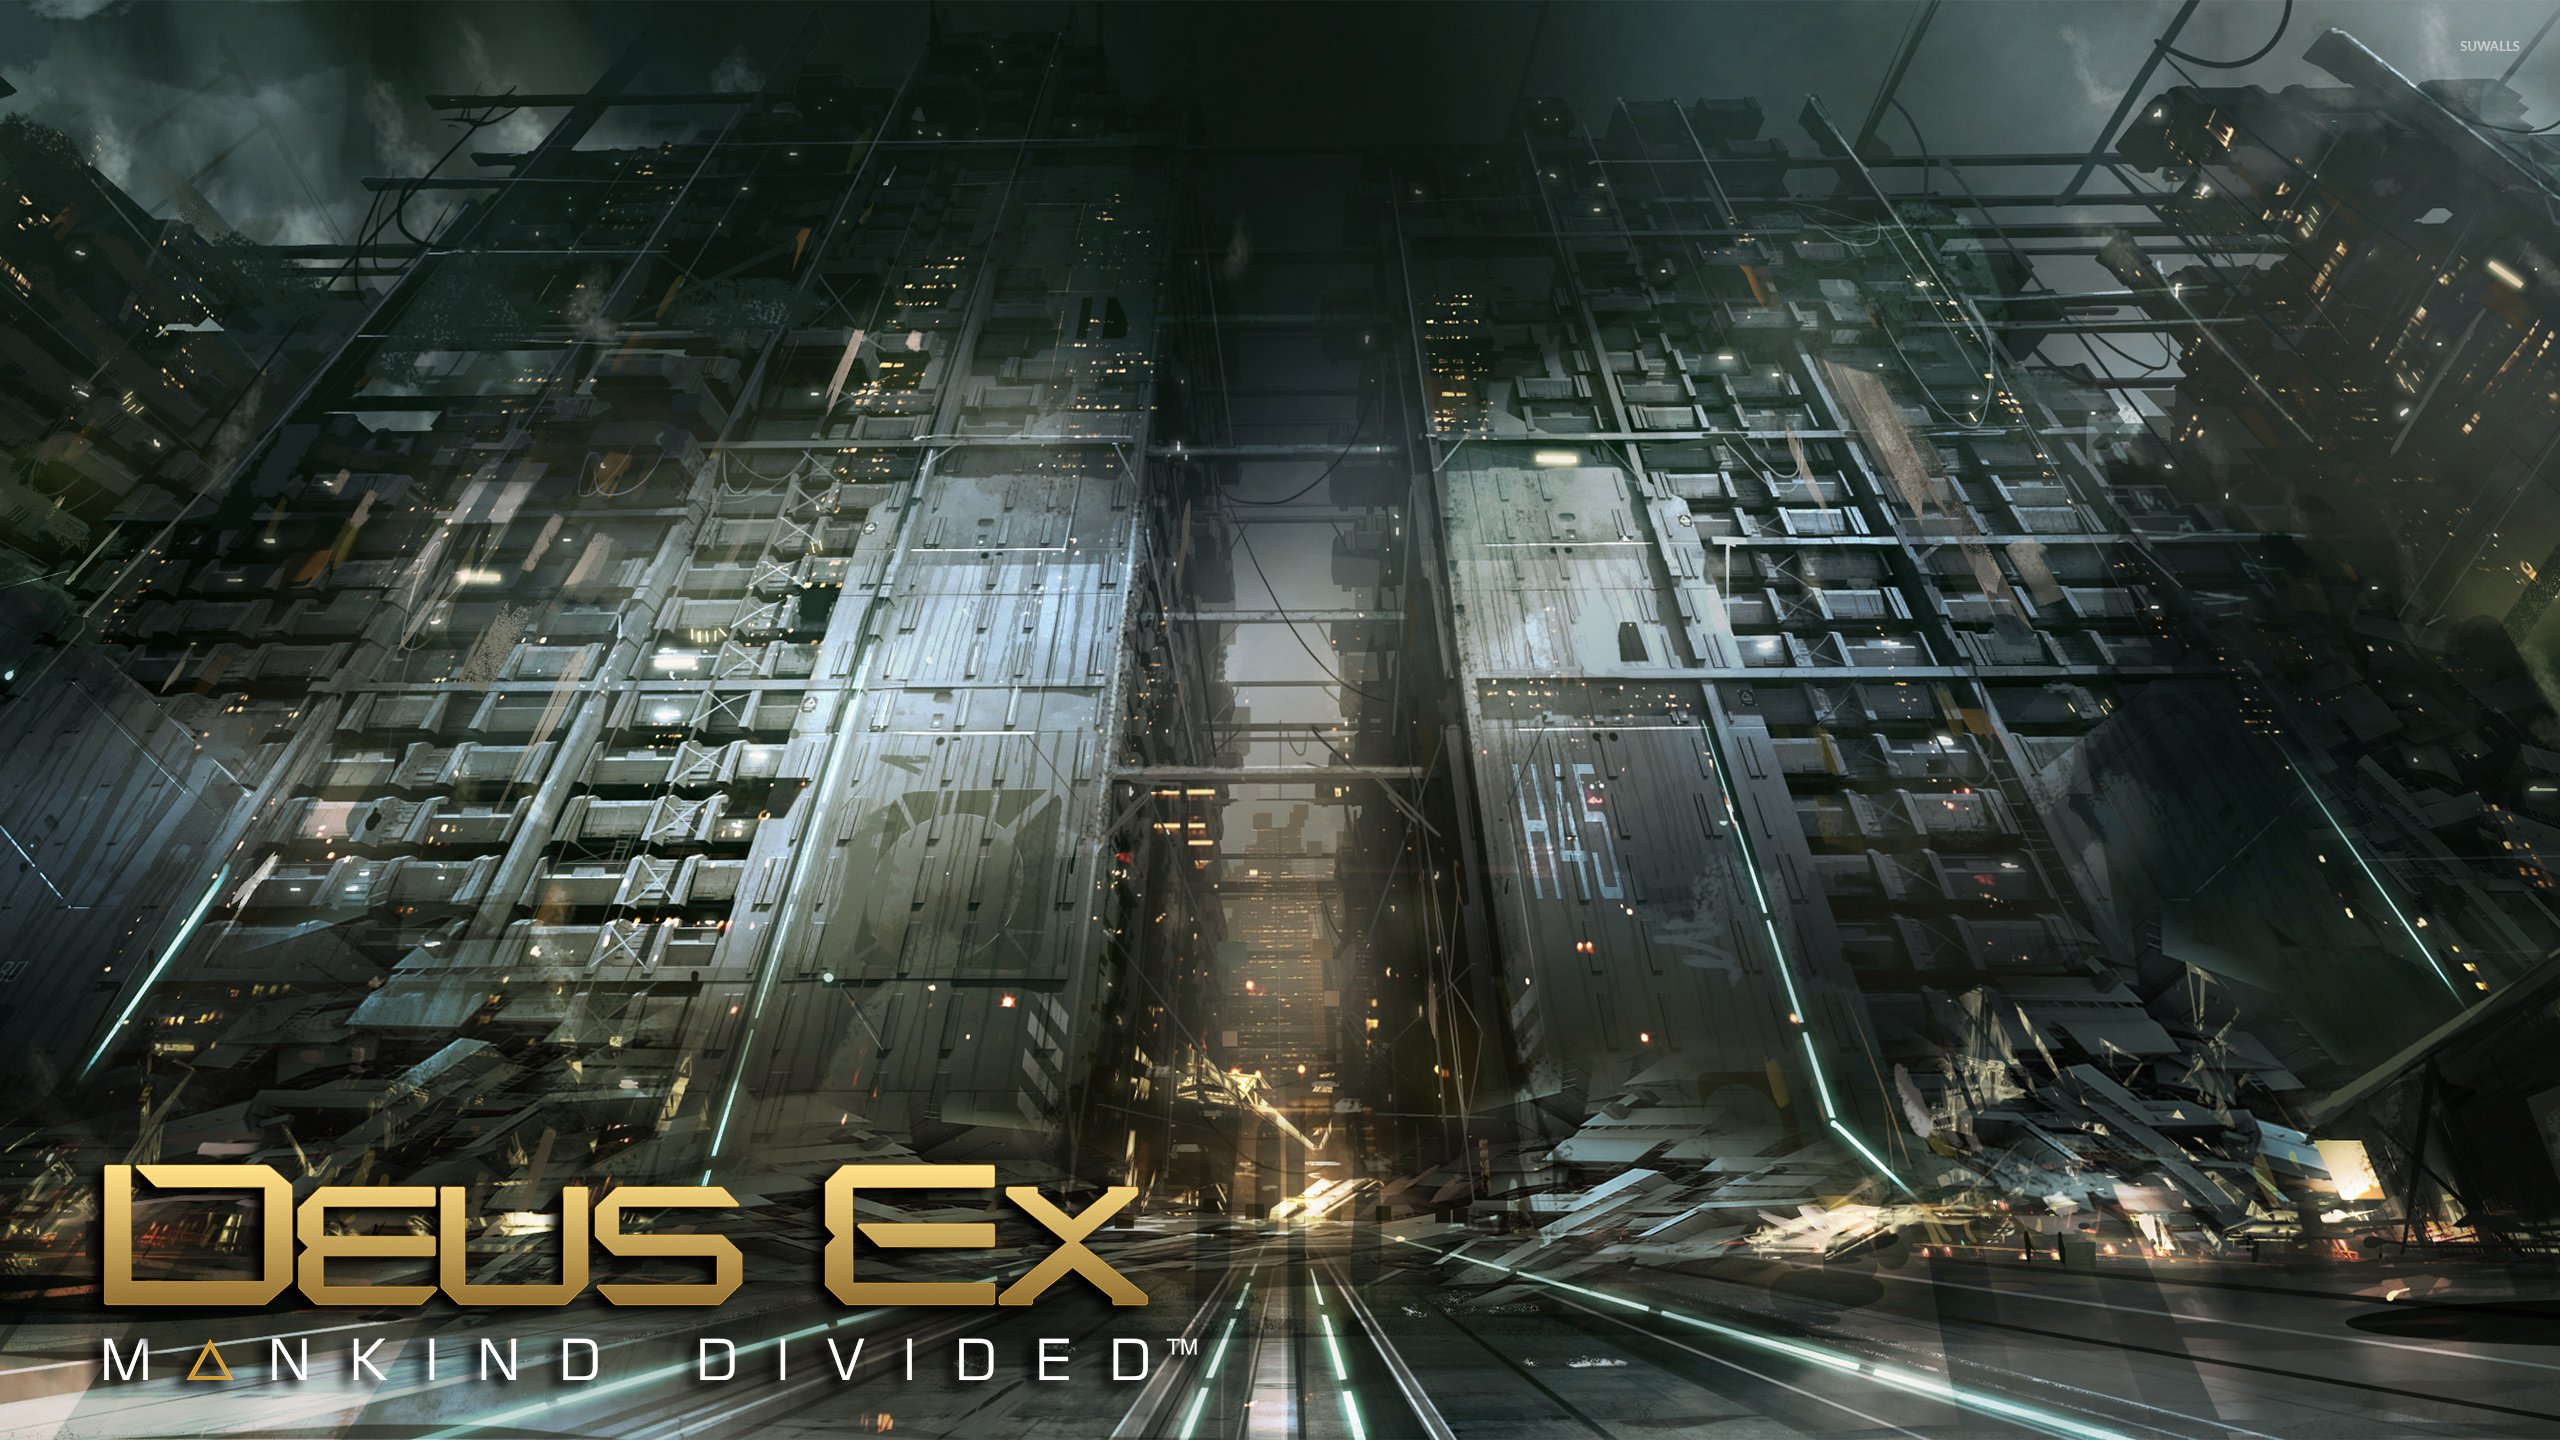 dues, Ex, Cyberpunk, Divided, Fps, Futuristic, Mankind, Rpg, Sci fi, Shooter, Stealth, Tactical, Warrior, Science, Fiction, Fighting, Cyber, Punk, Cyborg, Technics, Mankind, Divided, Human, Revolution, Crime Wallpaper